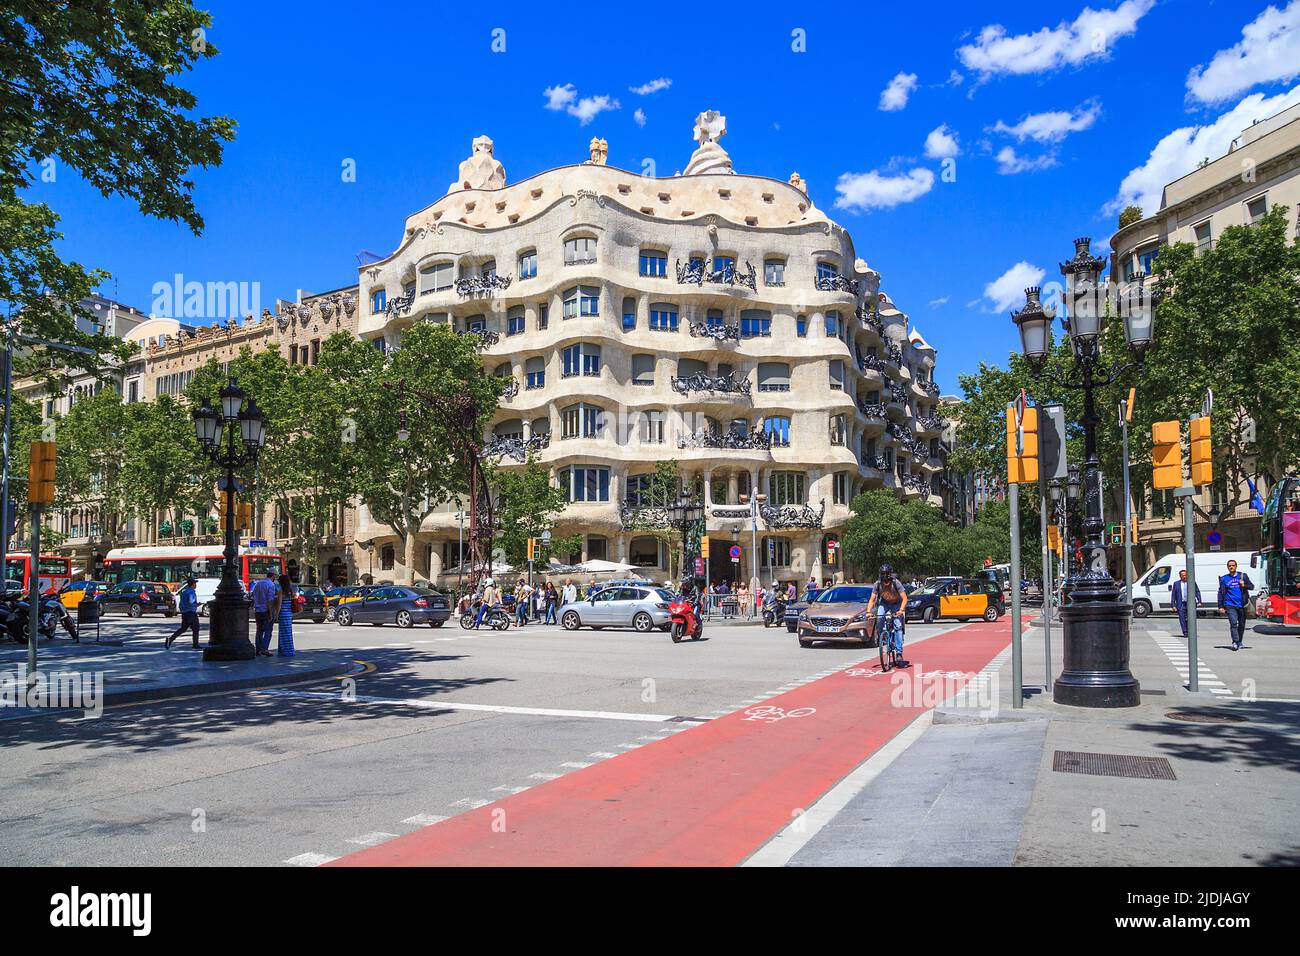 BARSELONA, SPAIN - MAY 12, 2017: Casa Mila is one of the masterpieces of the modernist era on avenue Pasec de Gracia. Stock Photo